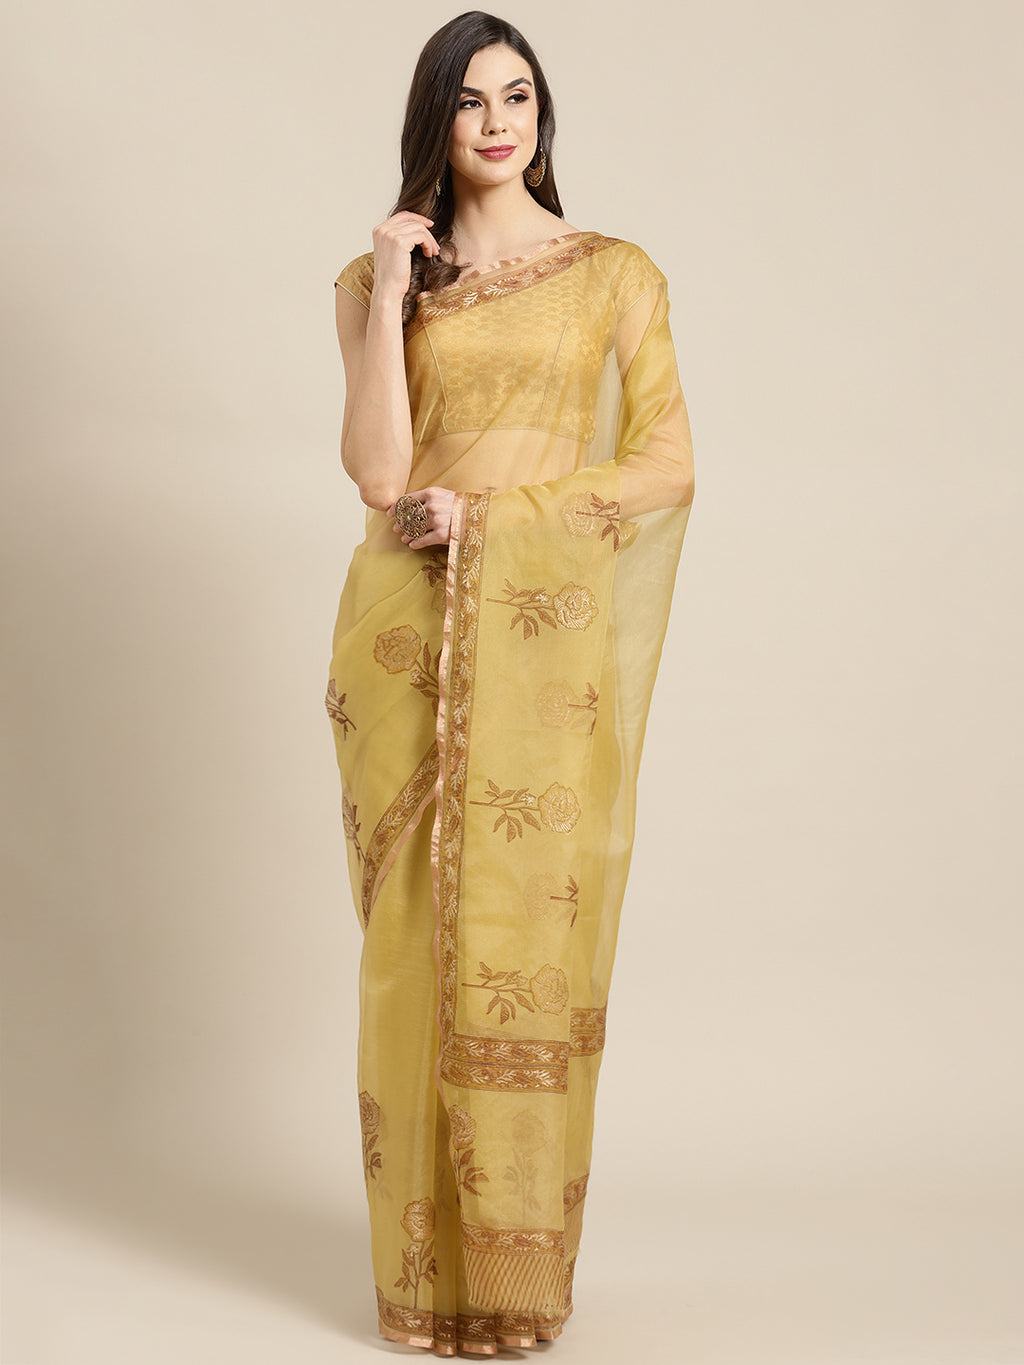 Cream and , Kalakari India Organza Hand Block Print Saree with blouse BHKPSA0154-Saree-Kalakari India-BHKPSA0154-Geographical Indication, Hand Crafted, Hand Painted, Heritage Prints, Natural Dyes, Organza, Red, Sarees, Sustainable Fabrics, Woven, Yellow-[Linen,Ethnic,wear,Fashionista,Handloom,Handicraft,Indigo,blockprint,block,print,Cotton,Chanderi,Blue, latest,classy,party,bollywood,trendy,summer,style,traditional,formal,elegant,unique,style,hand,block,print, dabu,booti,gift,present,glamorous,a